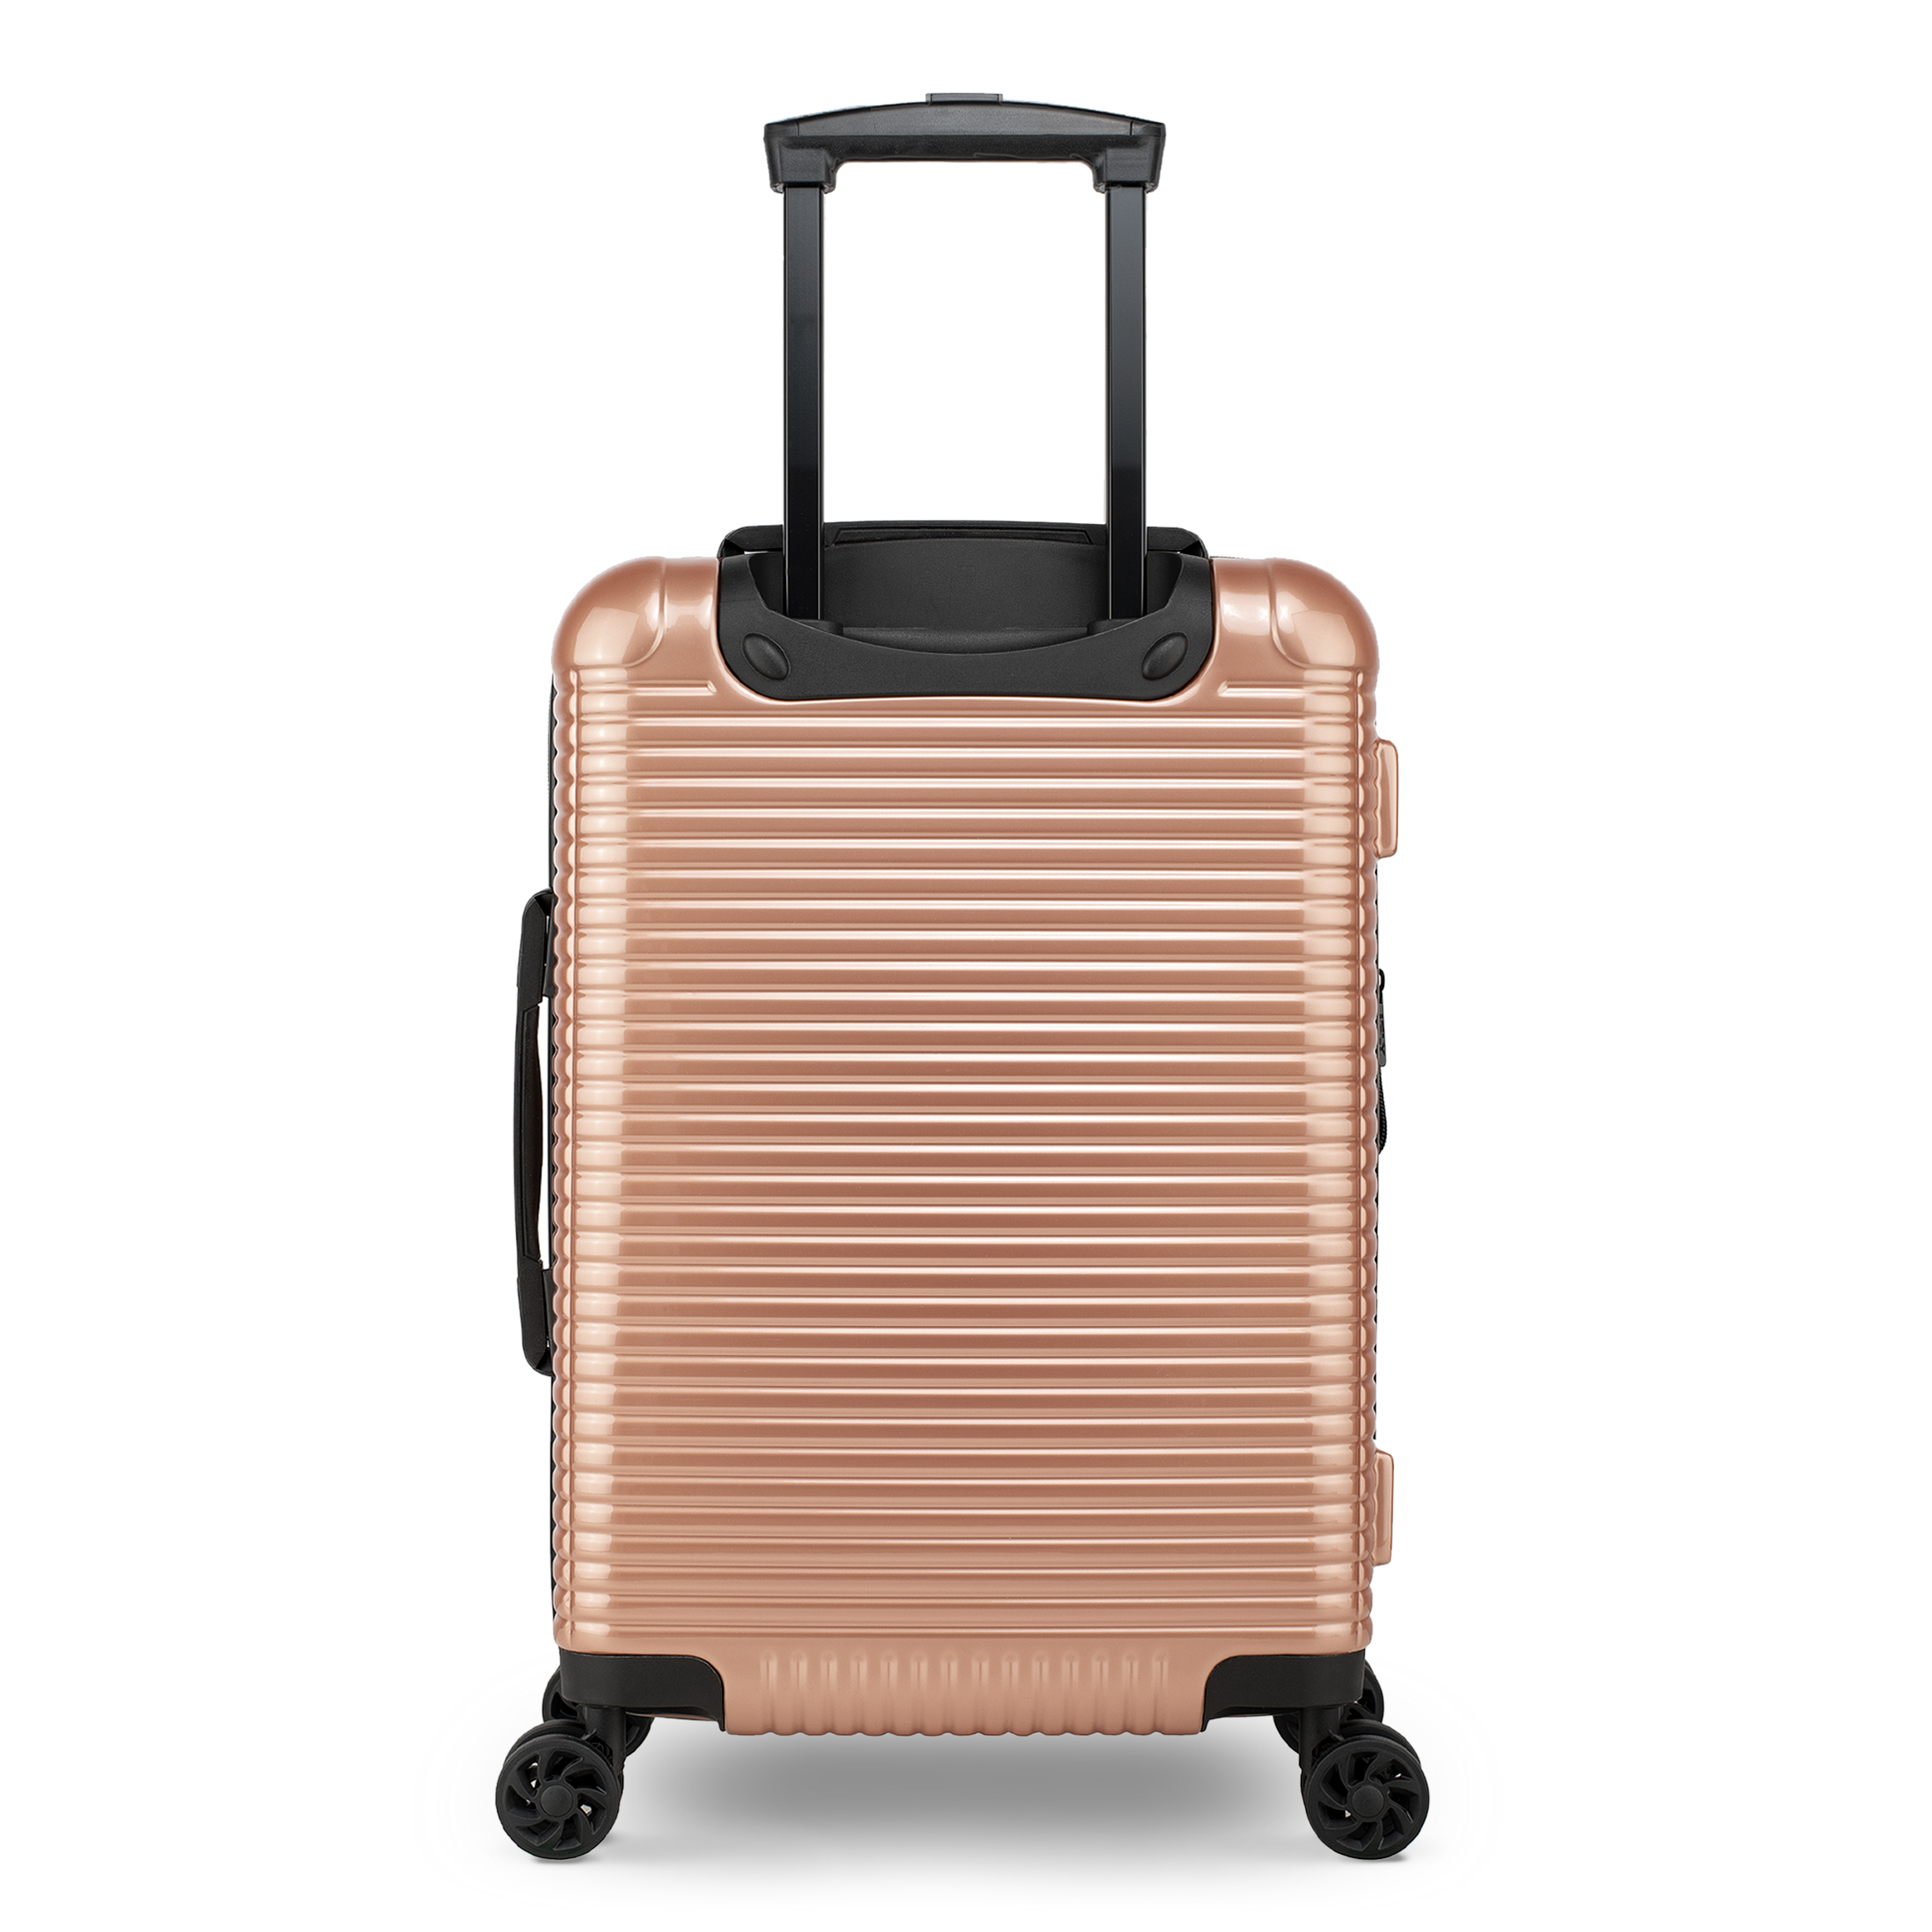 iFLY Hardside Alloy 20 Inch Carry-on, Copper - image 4 of 9